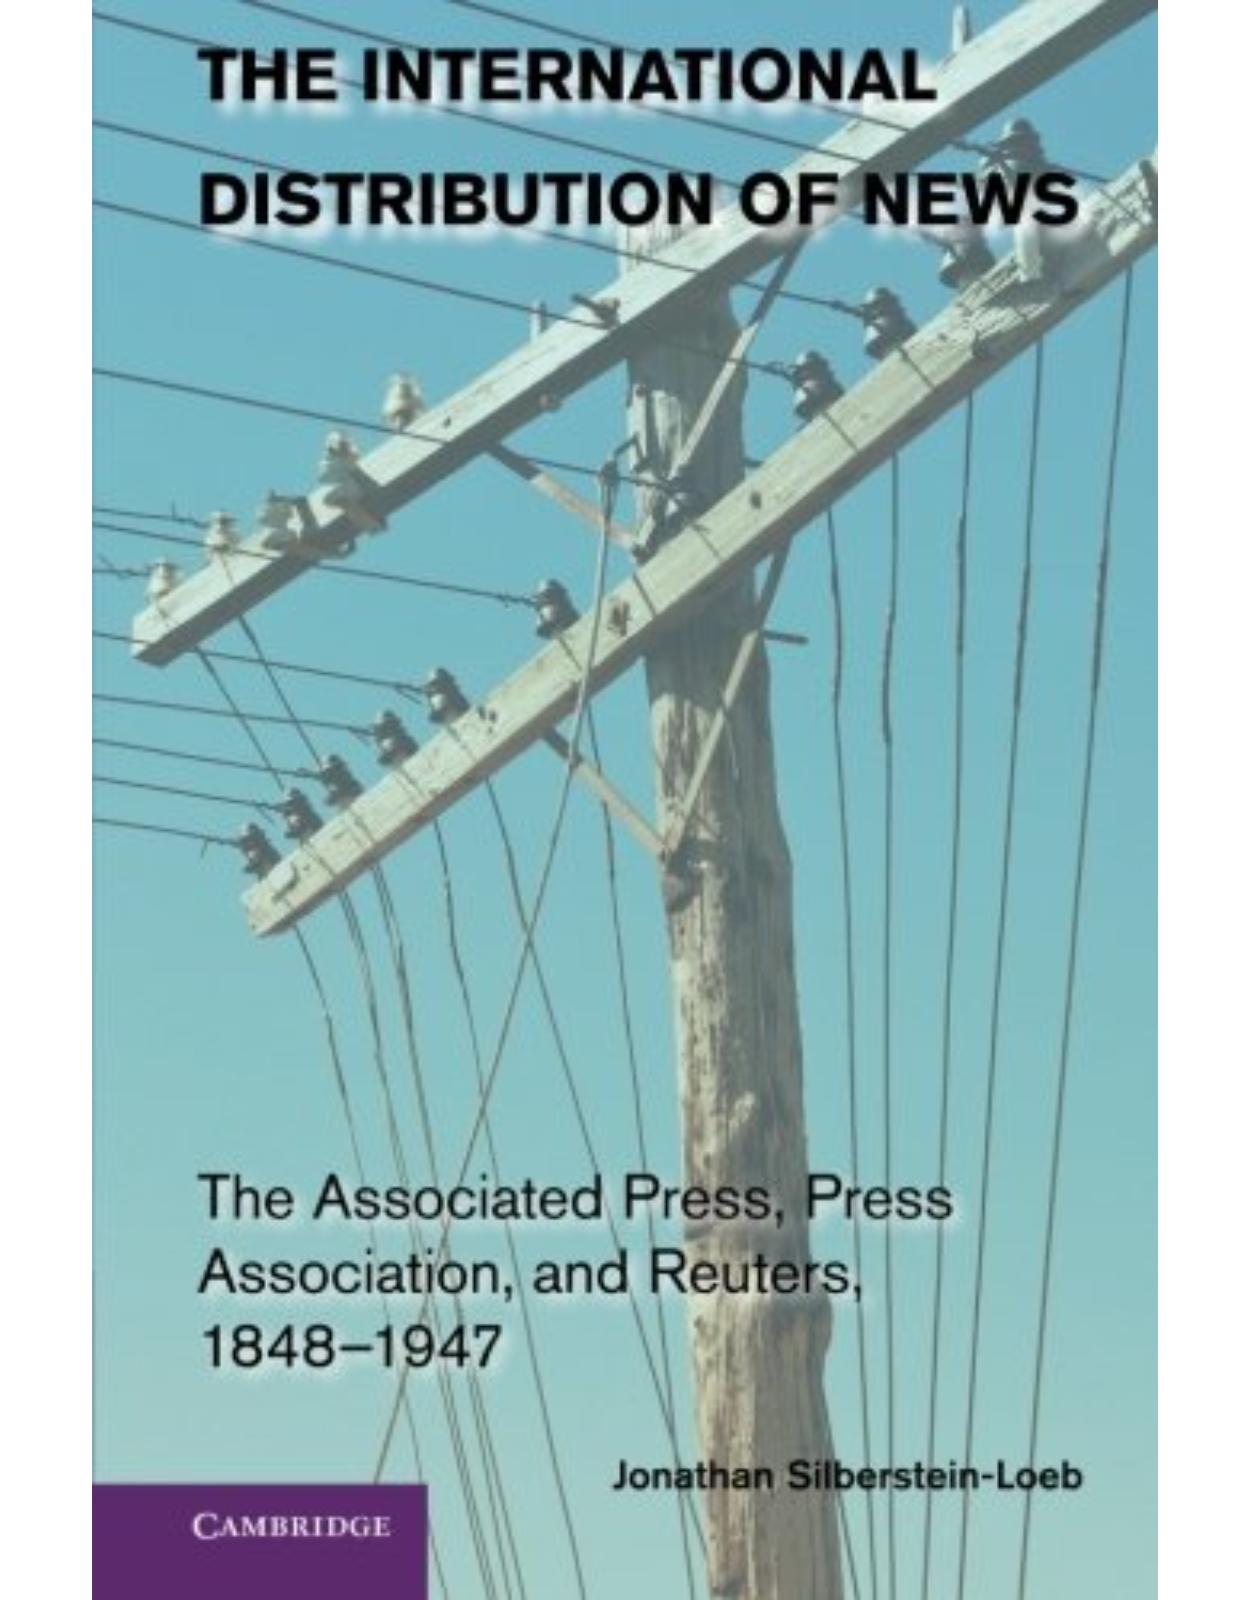 The International Distribution of News: The Associated Press, Press Association, and Reuters, 1848-1947